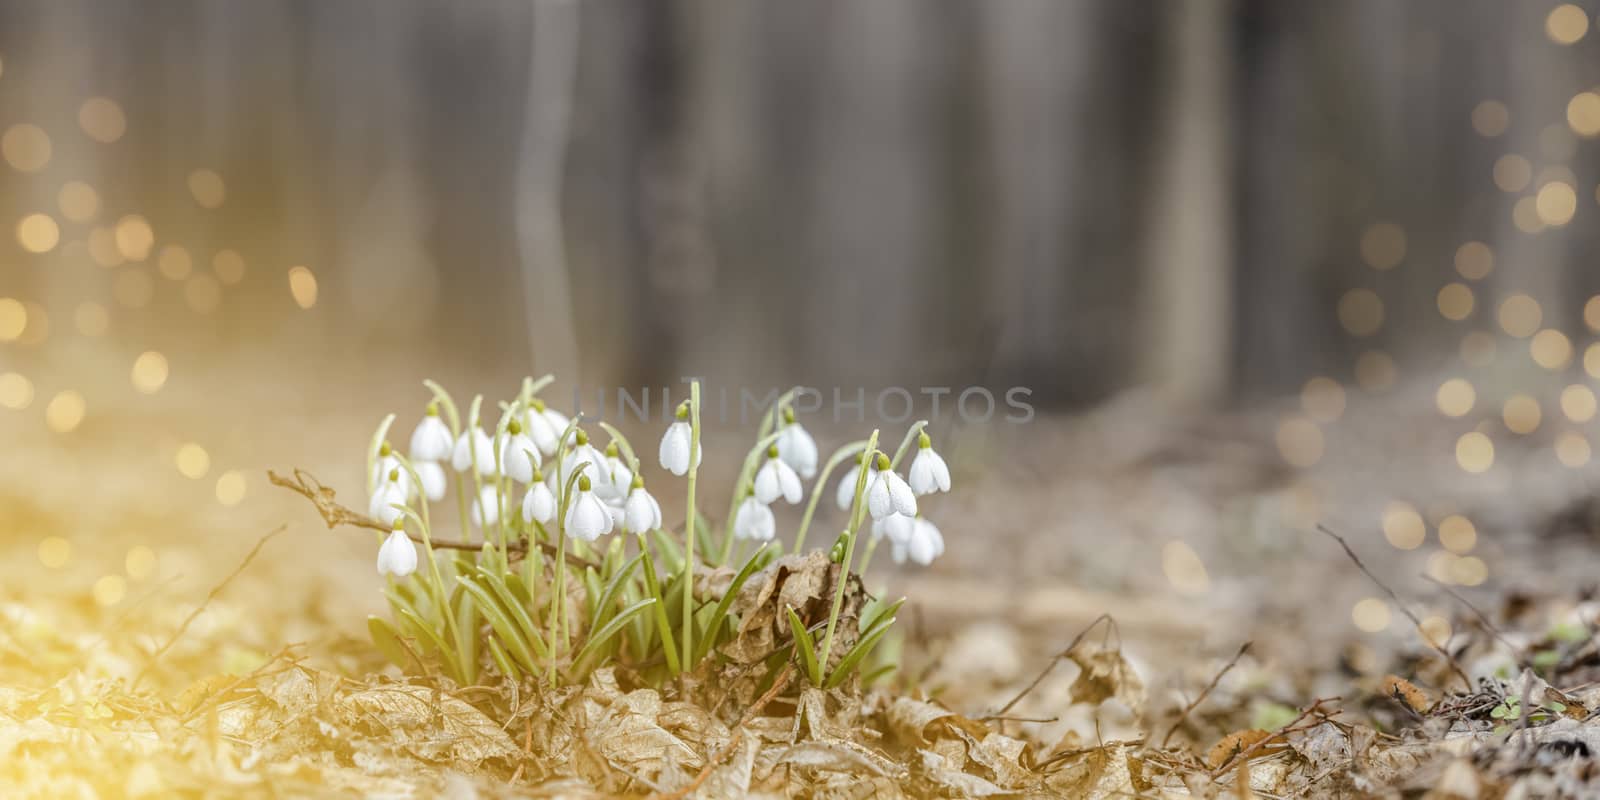 Panoramic view to spring flowers in the forest. White blooming snowdrop folded or Galanthus plicatus in the forest background. Spring day, dolly shot, close up, shallow depths of the field.